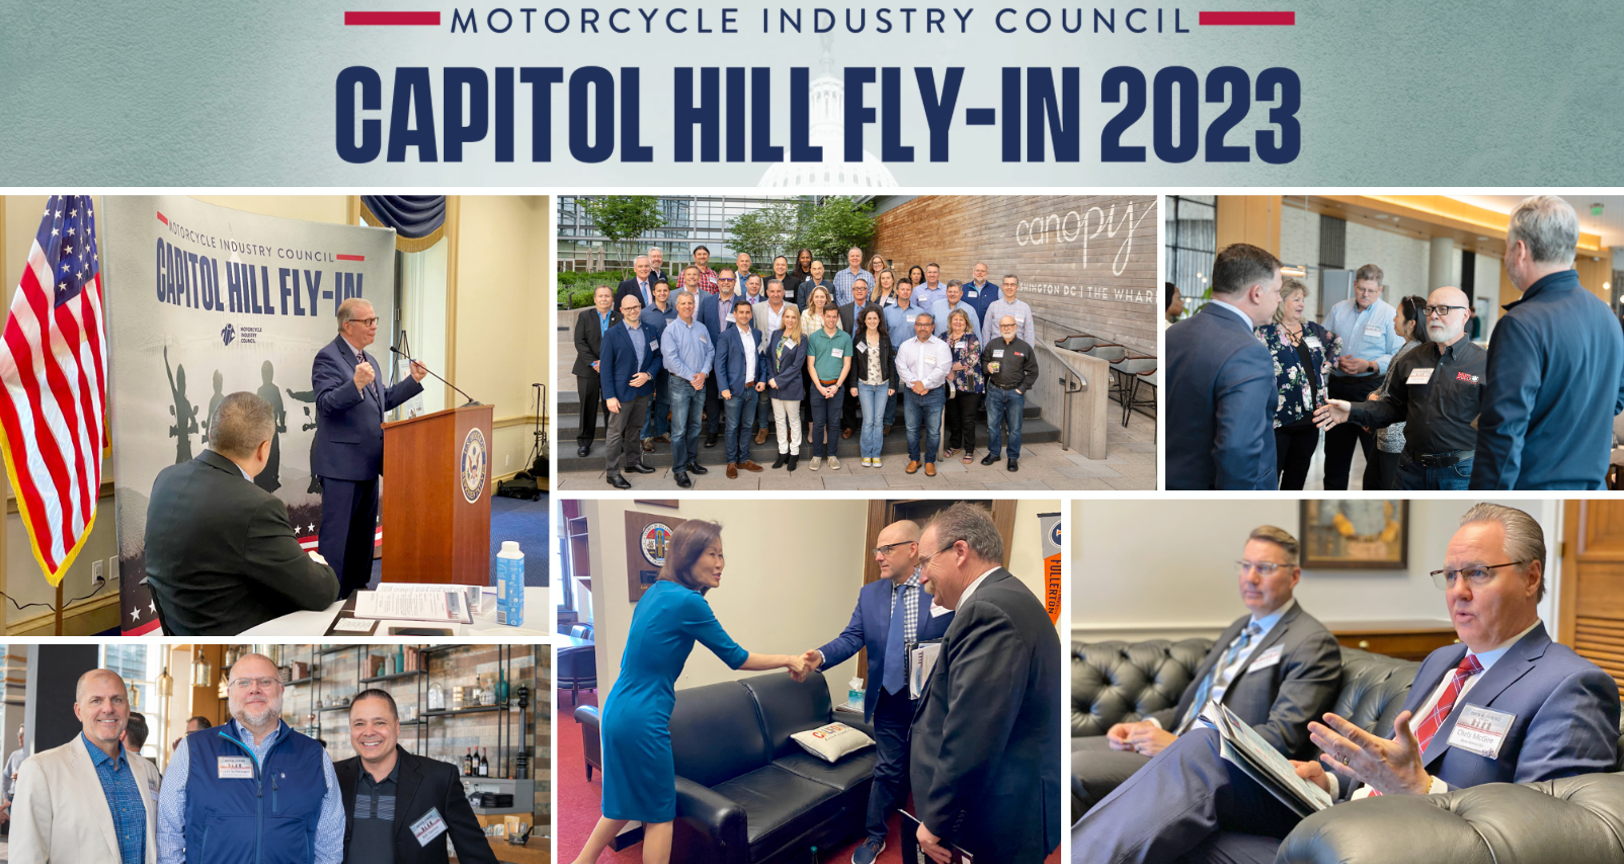 MIC Capital Hill Fly-In 2023